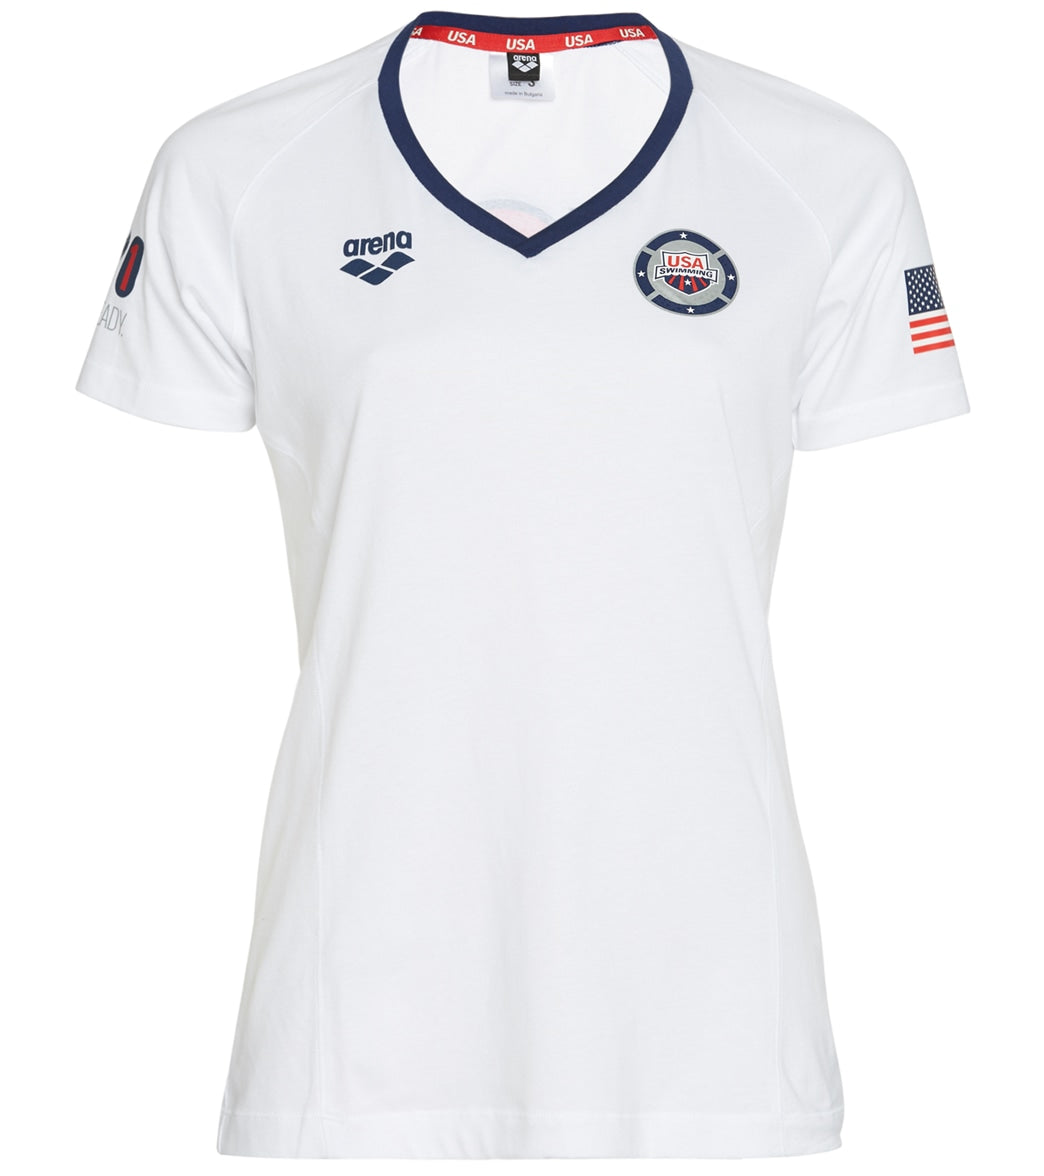 Usa Swimming Arena Women's 2021 We'll Be Ready National Team Short Sleeve Tee Shirt - White/Navy Xxs Size X-Small Cotton - Swimoutlet.com